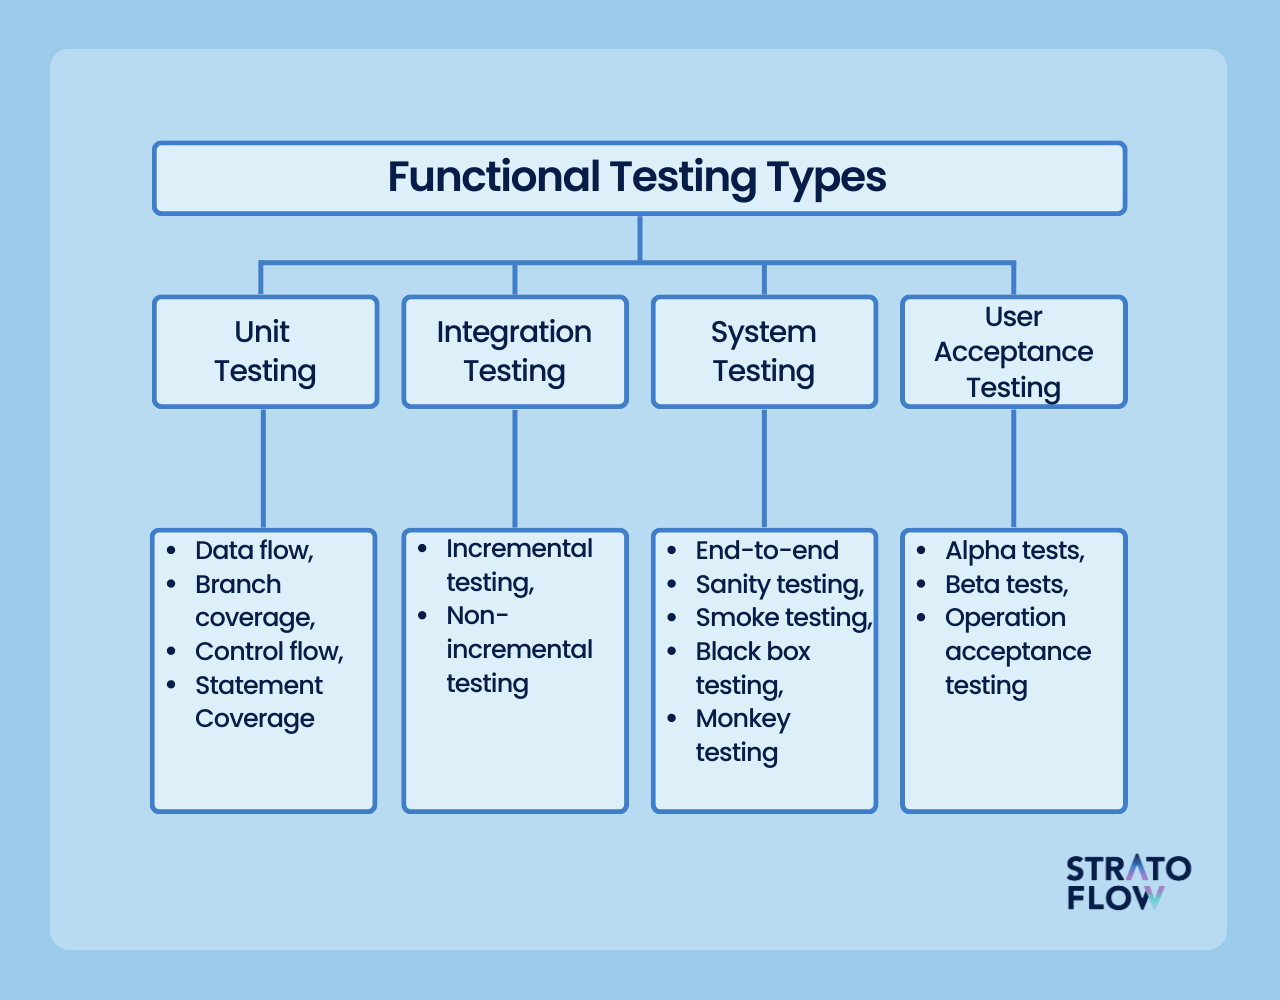 21 Types of Software Testing Every Engineer Should Be Using for Better ...